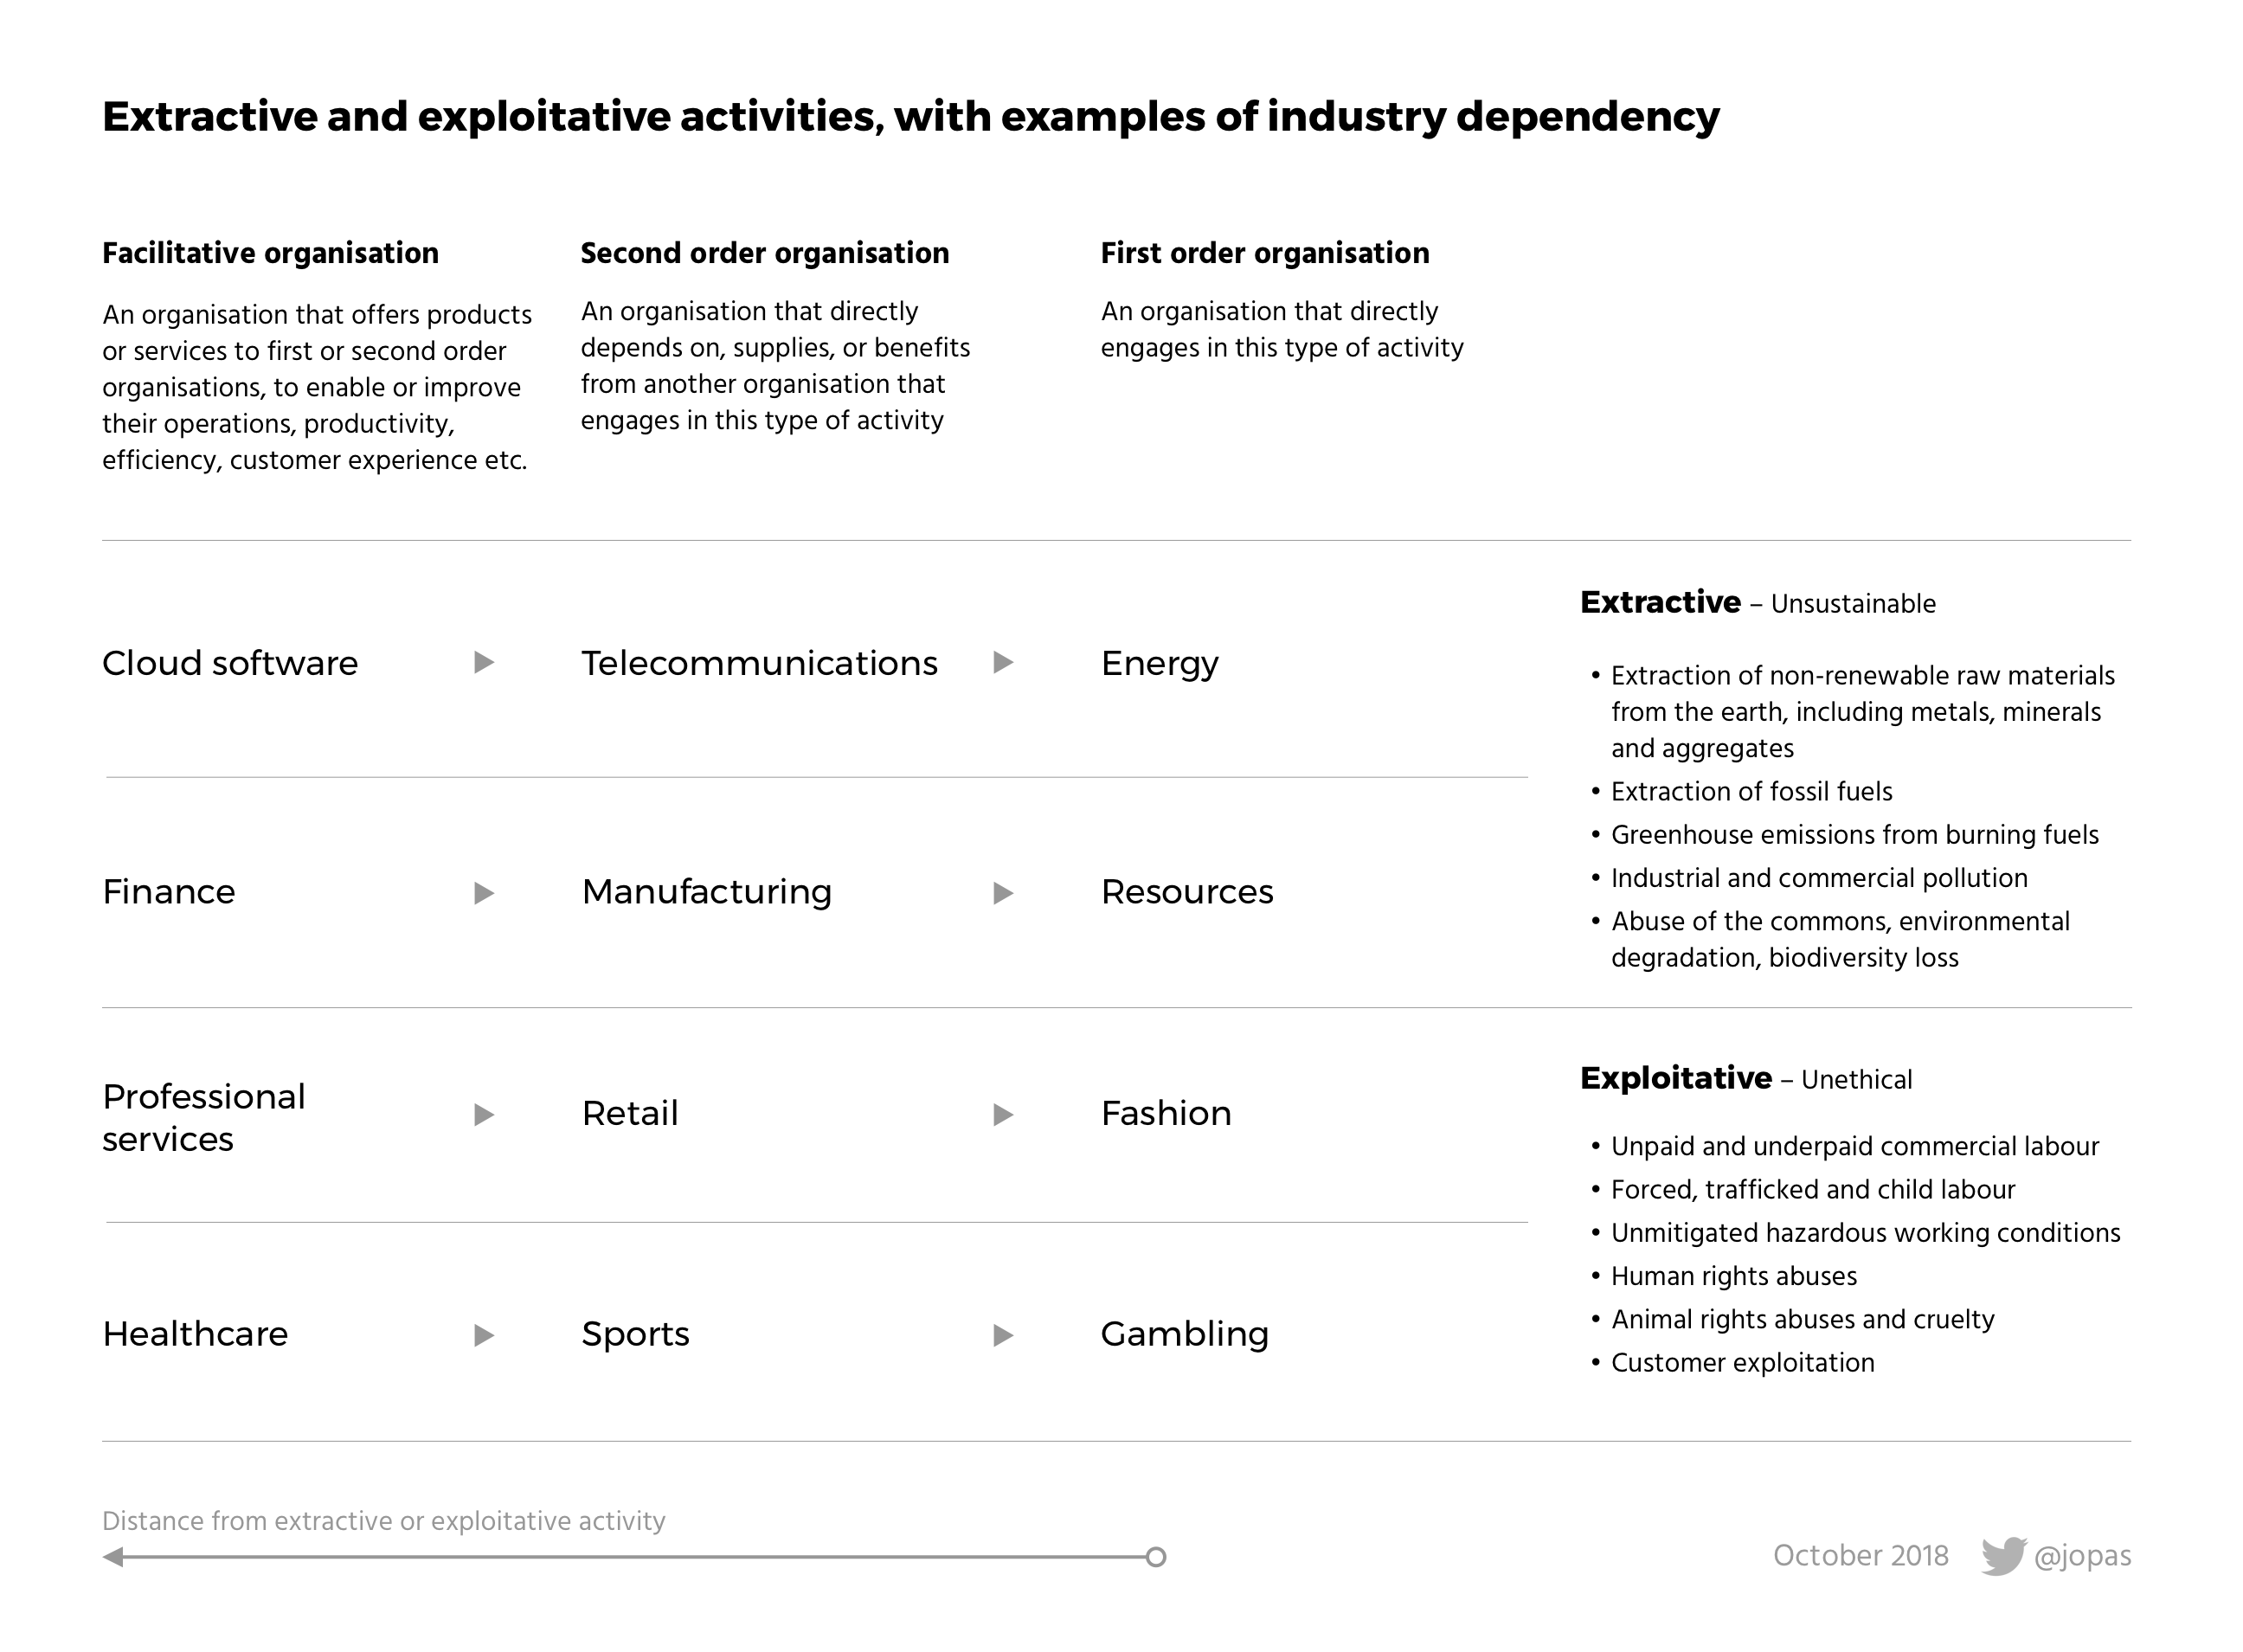 Extractive and exploitative industries, with example dependencies